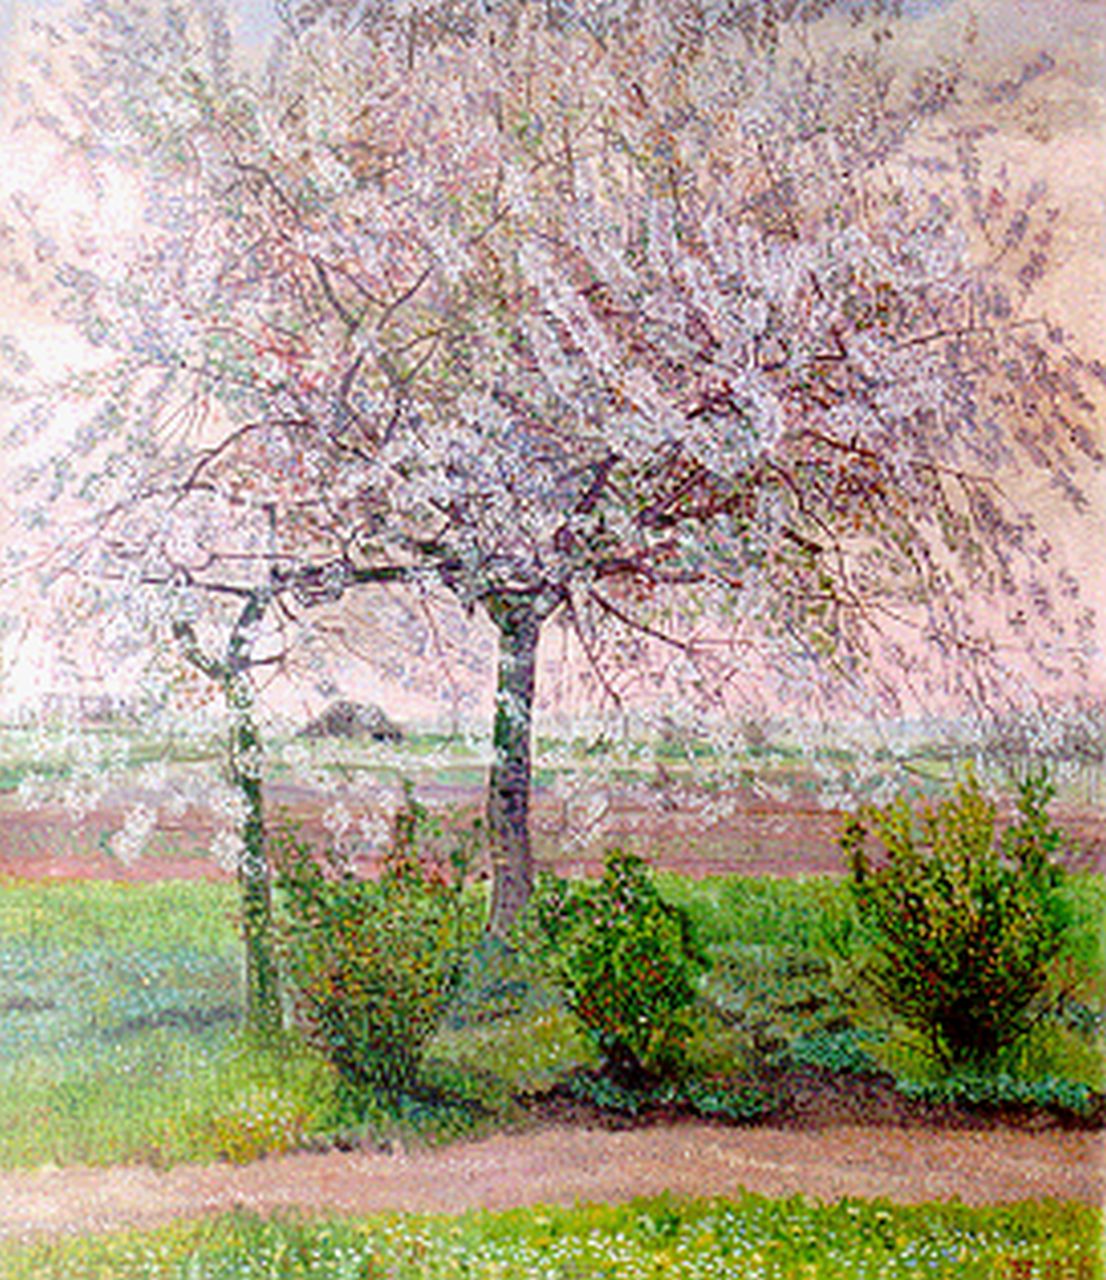 Nieweg J.  | Jakob Nieweg, A blossoming tree, oil on canvas 70.3 x 60.2 cm, signed l.l. with monogram and dated 1926